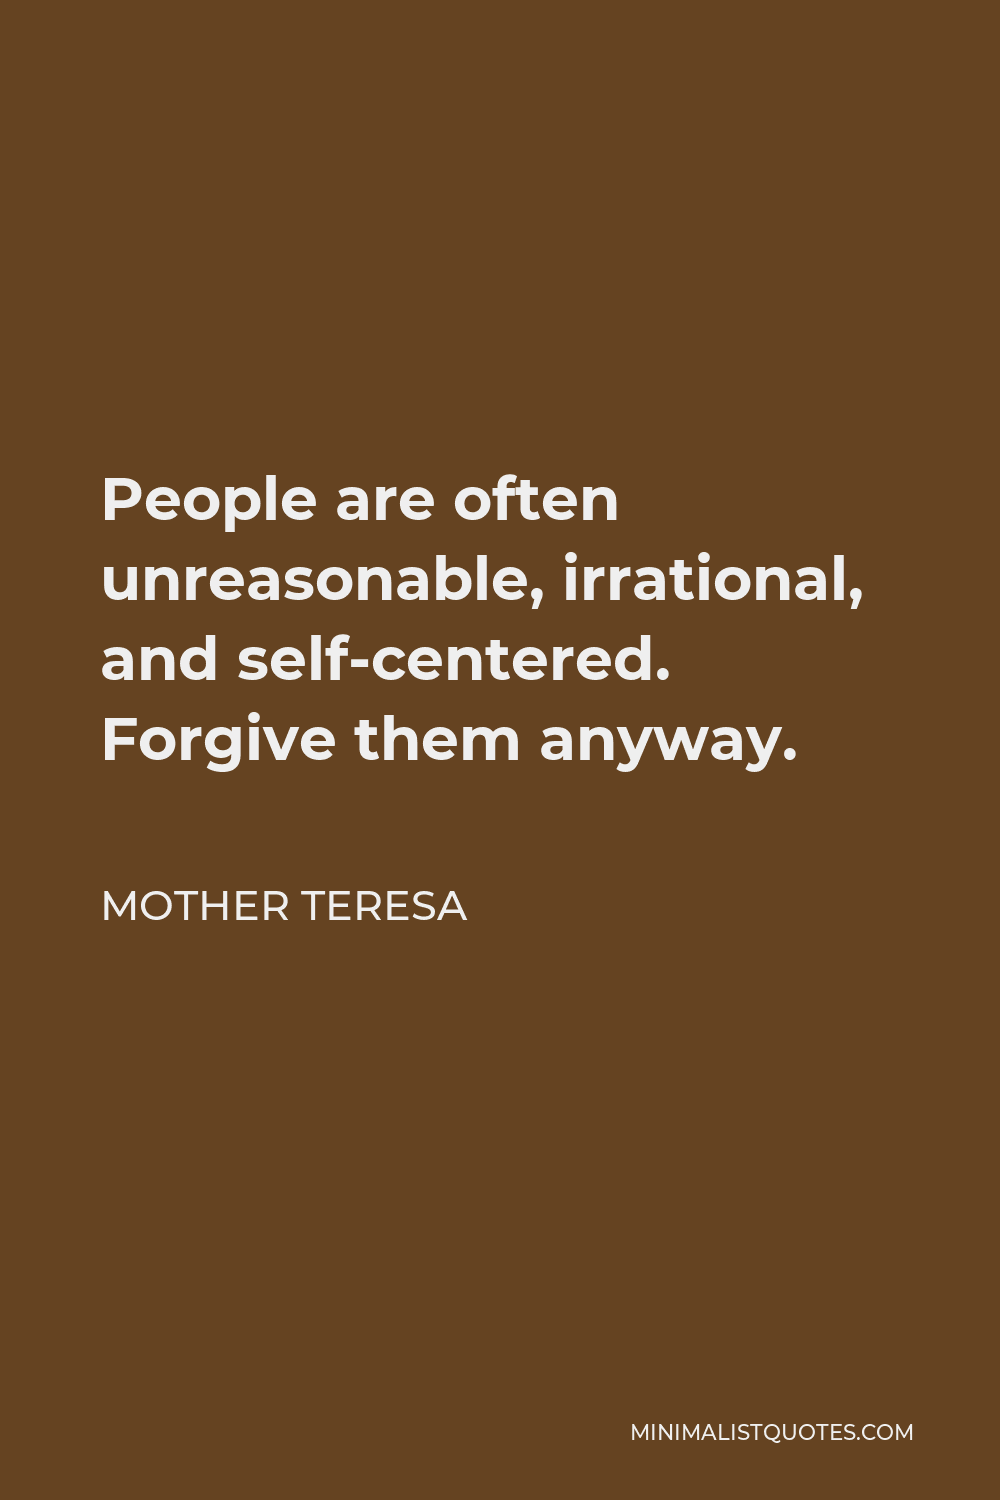 Mother Teresa Quote - People are often unreasonable, irrational, and self-centered. Forgive them anyway.